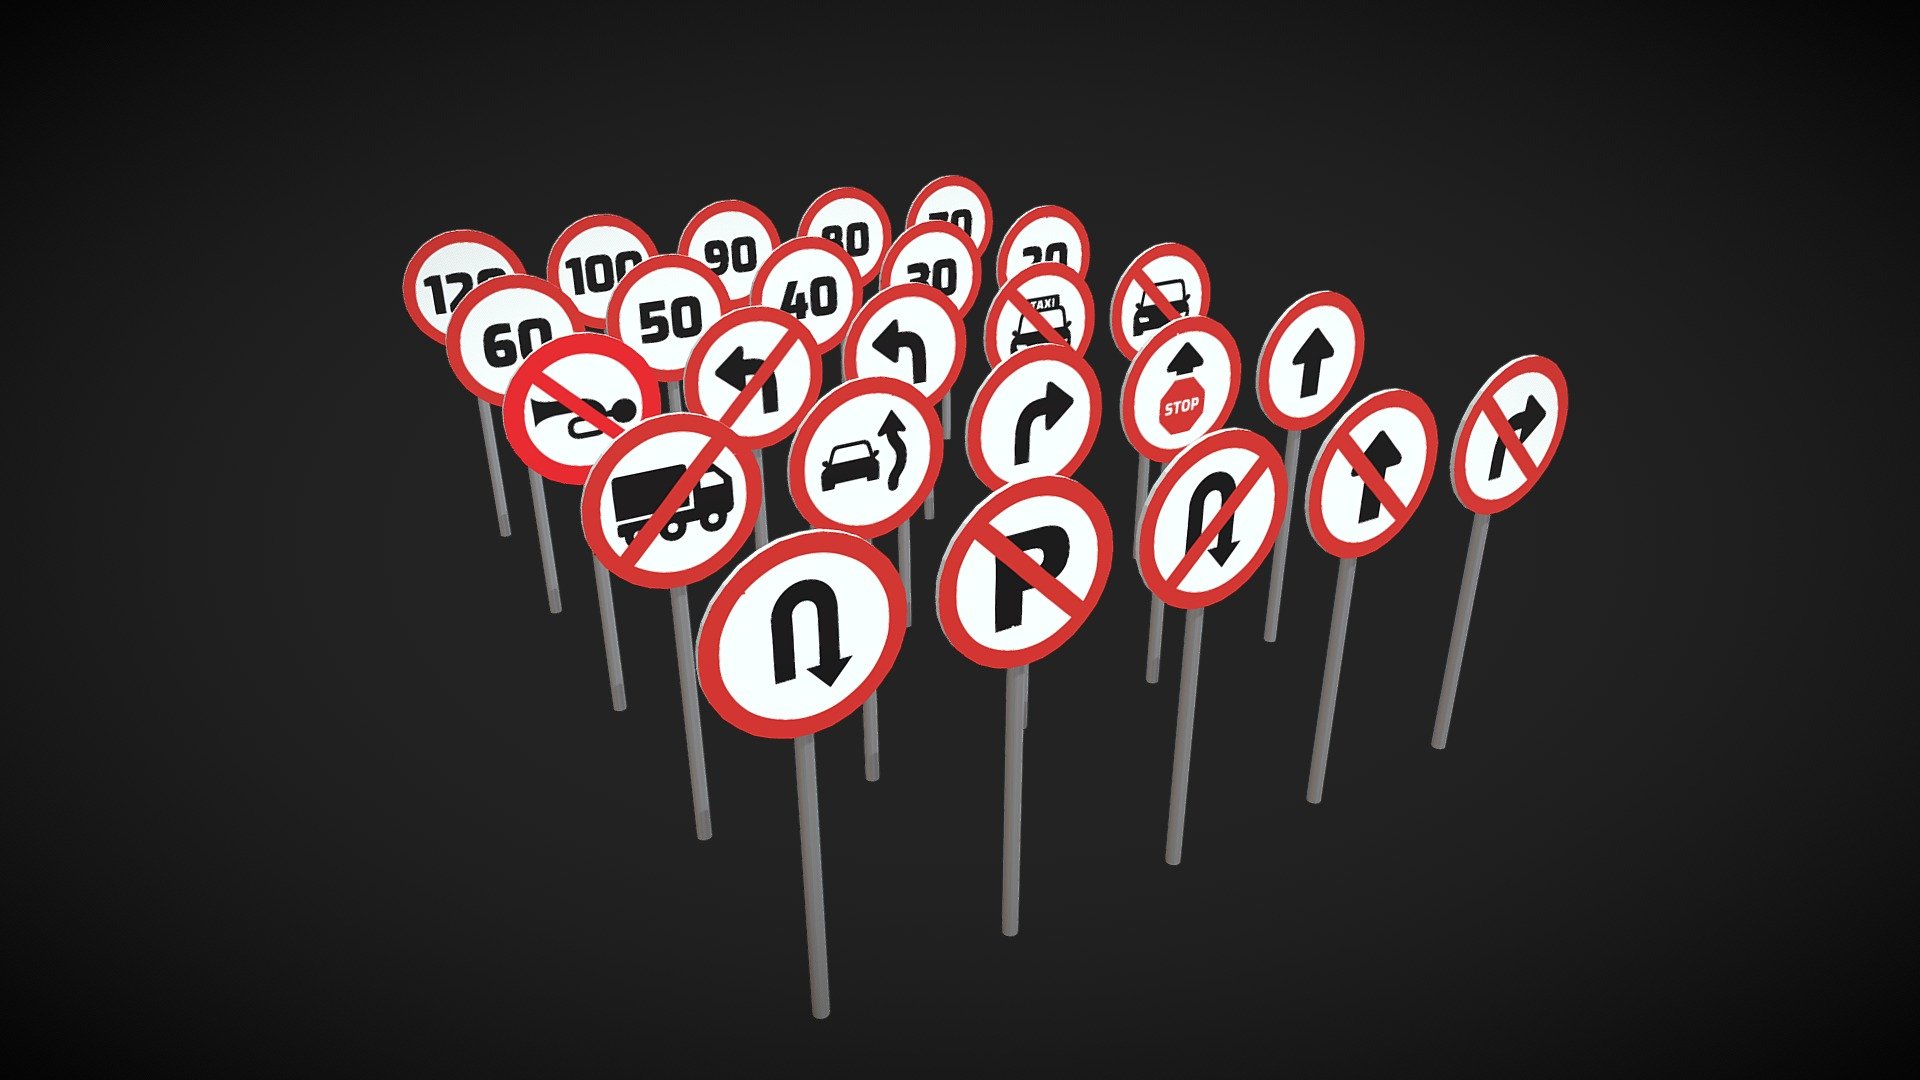 Traffic warning signs
Medium quality
Can be used in games or shooting scenes
Consists of 25 signs
Texture is High quality - Warning traffic signs - Download Free 3D model by CoderBoy (@baso4388) 3d model